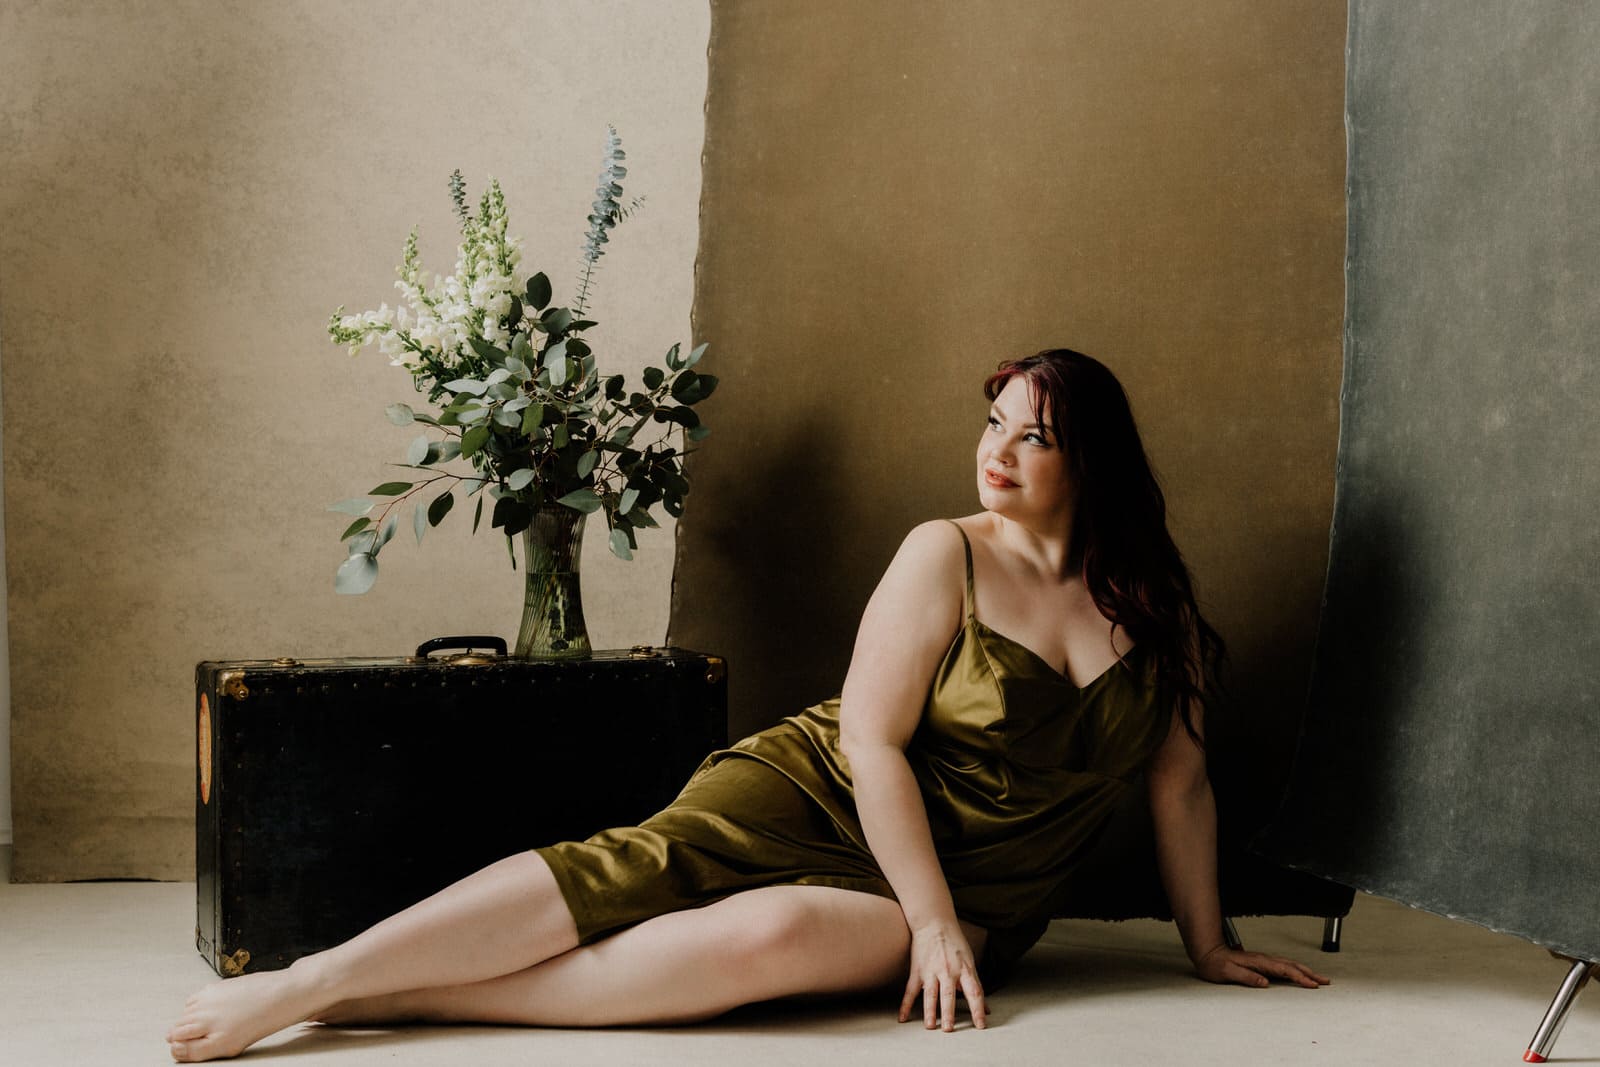 Plus size boudoir photo of a woman sitting on the floor and a vase of flowers